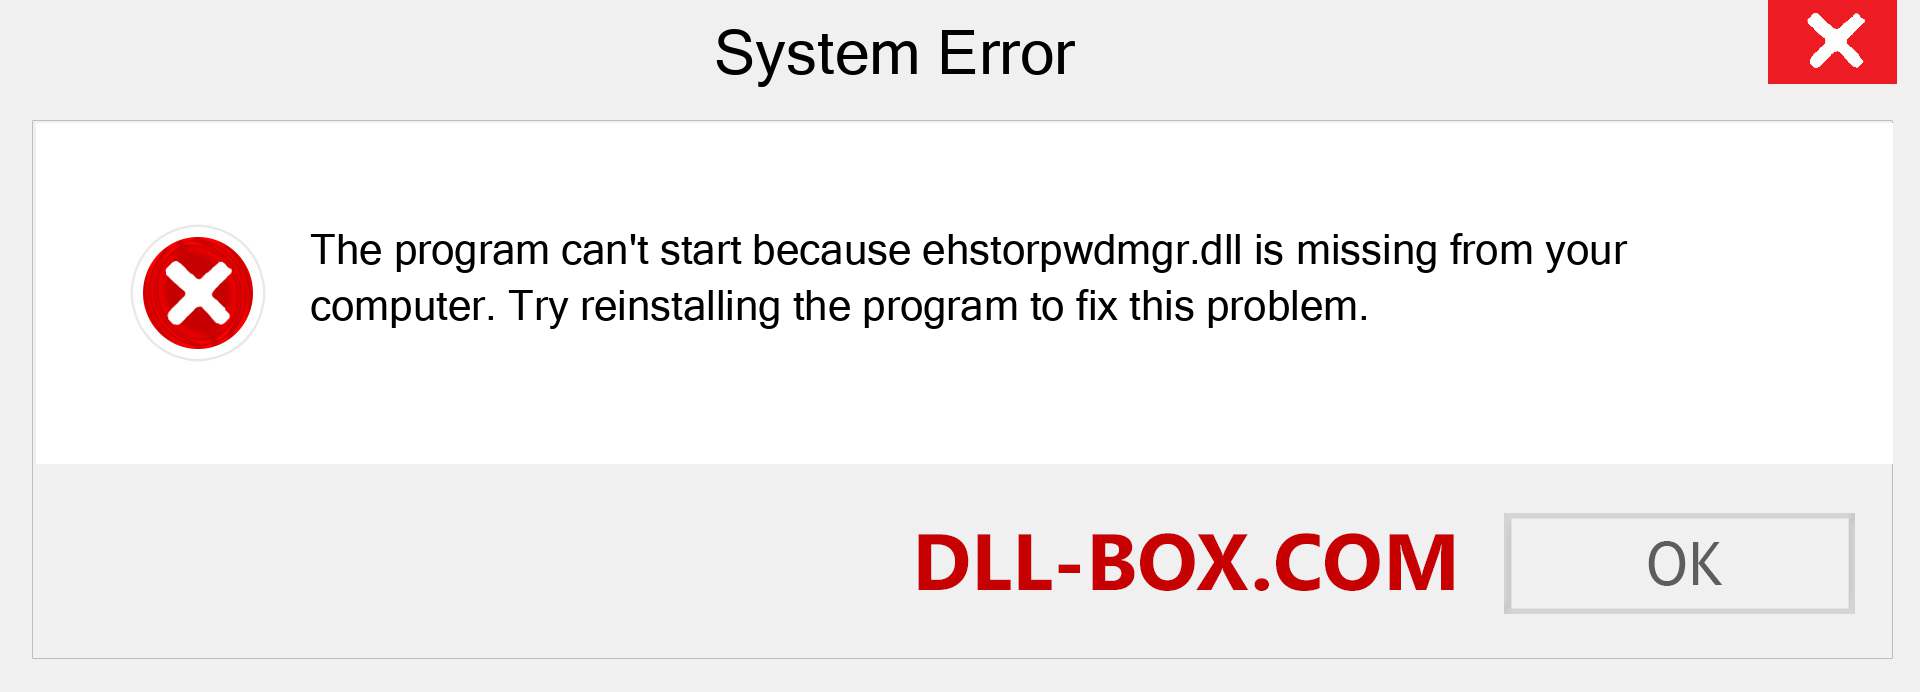  ehstorpwdmgr.dll file is missing?. Download for Windows 7, 8, 10 - Fix  ehstorpwdmgr dll Missing Error on Windows, photos, images